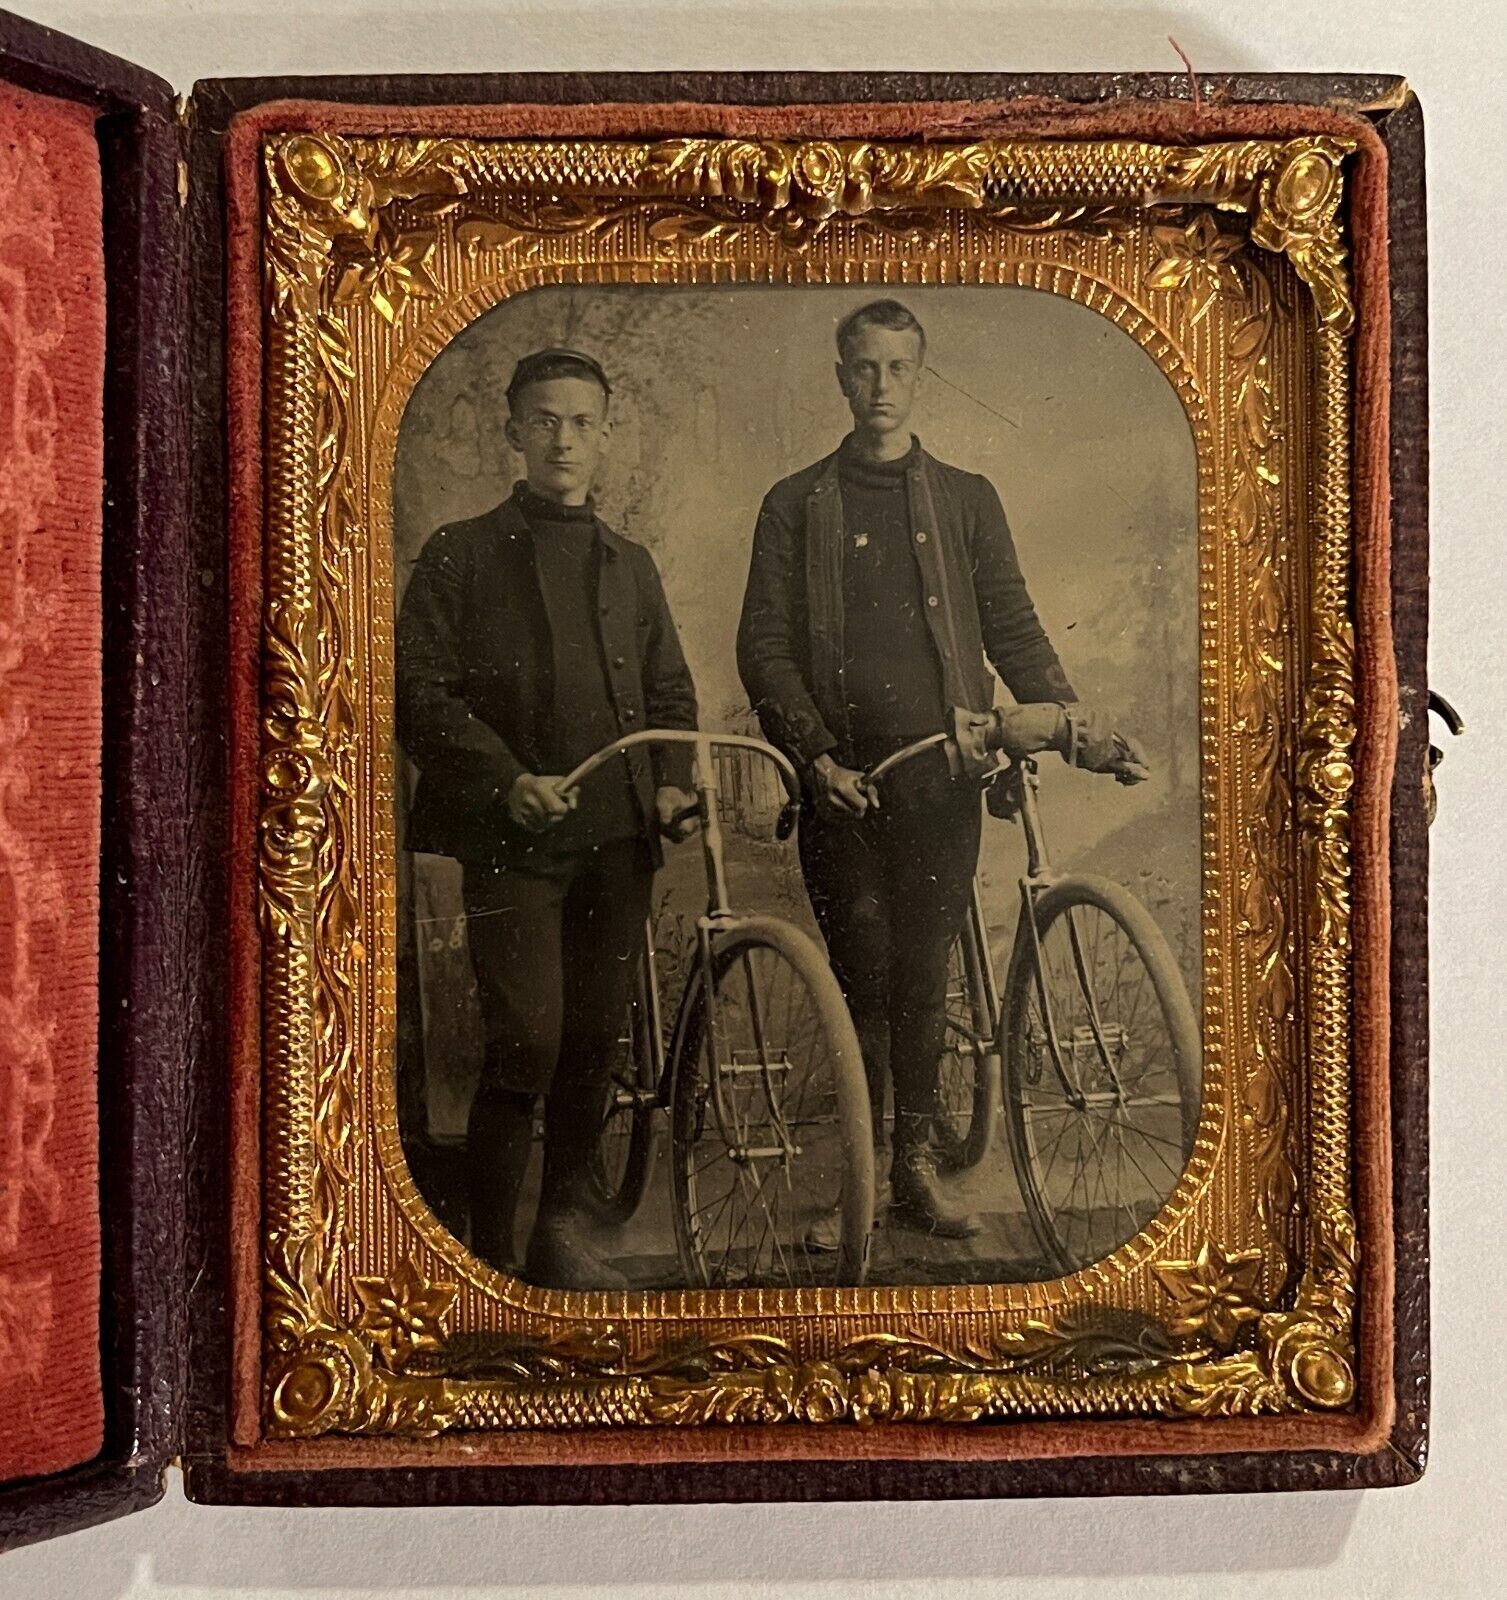 1890's Ambrotype - Antique Photo of Two Men on Bicycles